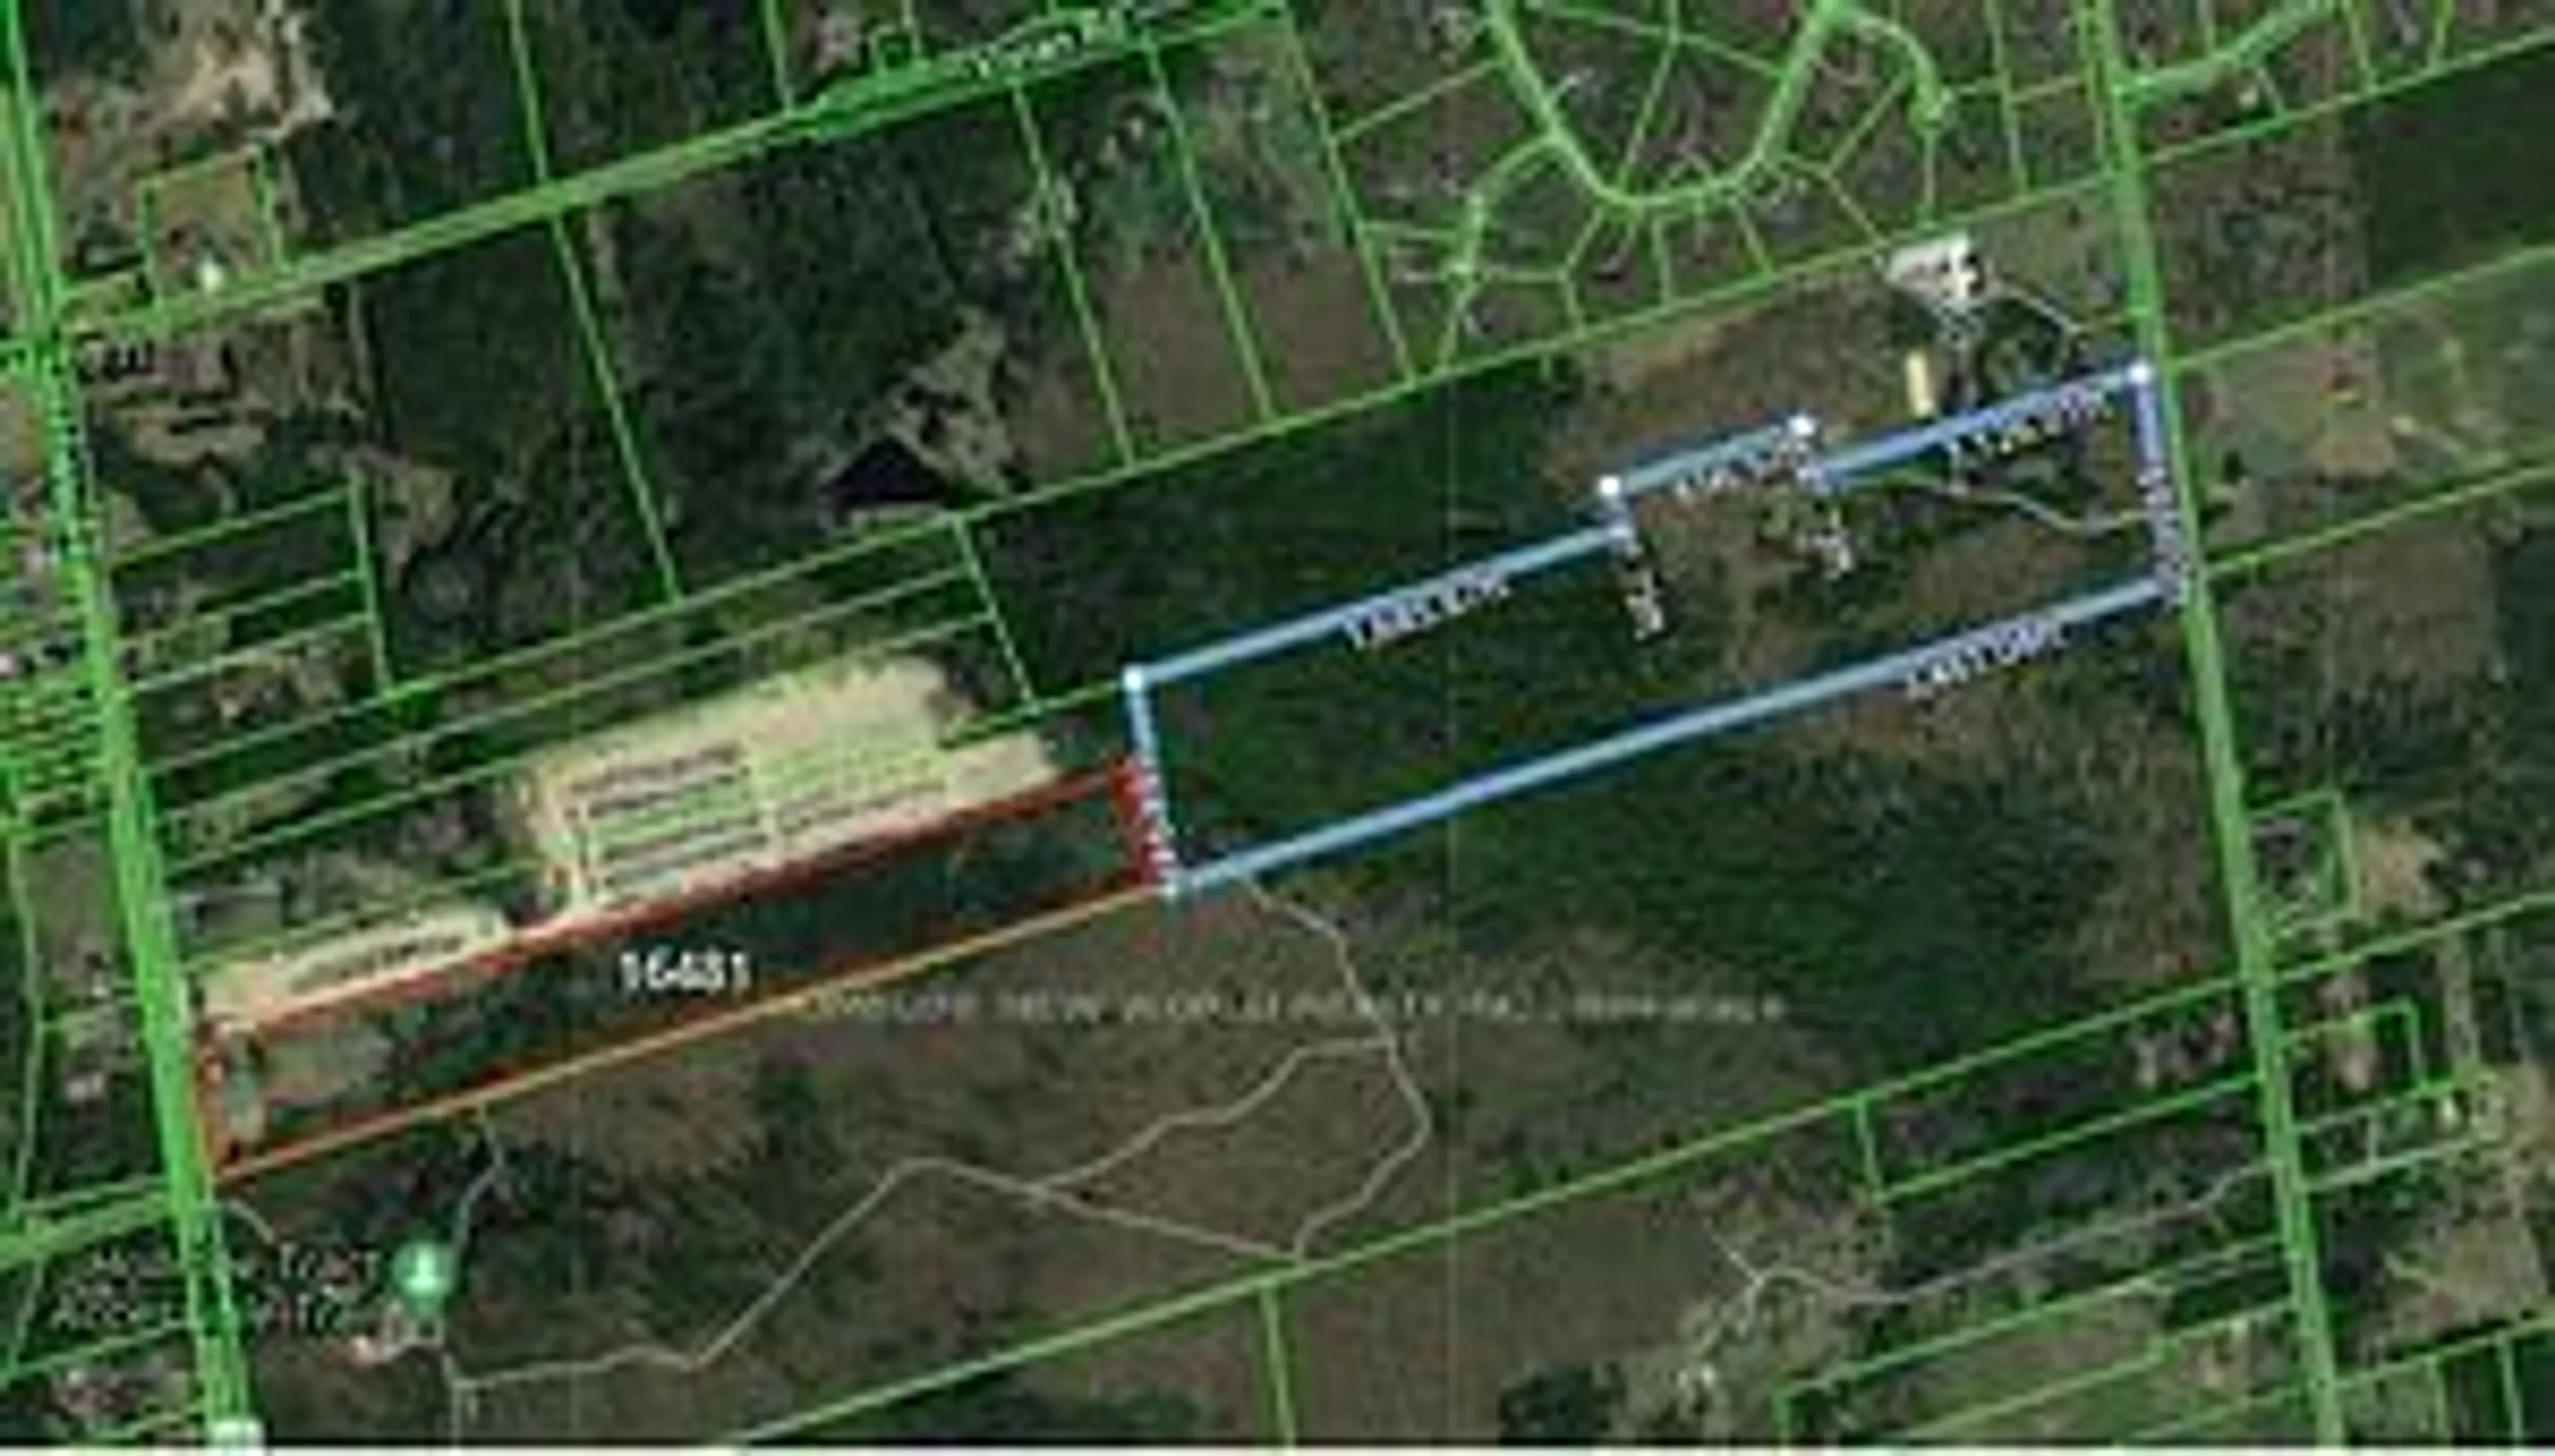 Picture of a map for 16481 Highway 48 Rd, Whitchurch-Stouffville Ontario L4A 3M4